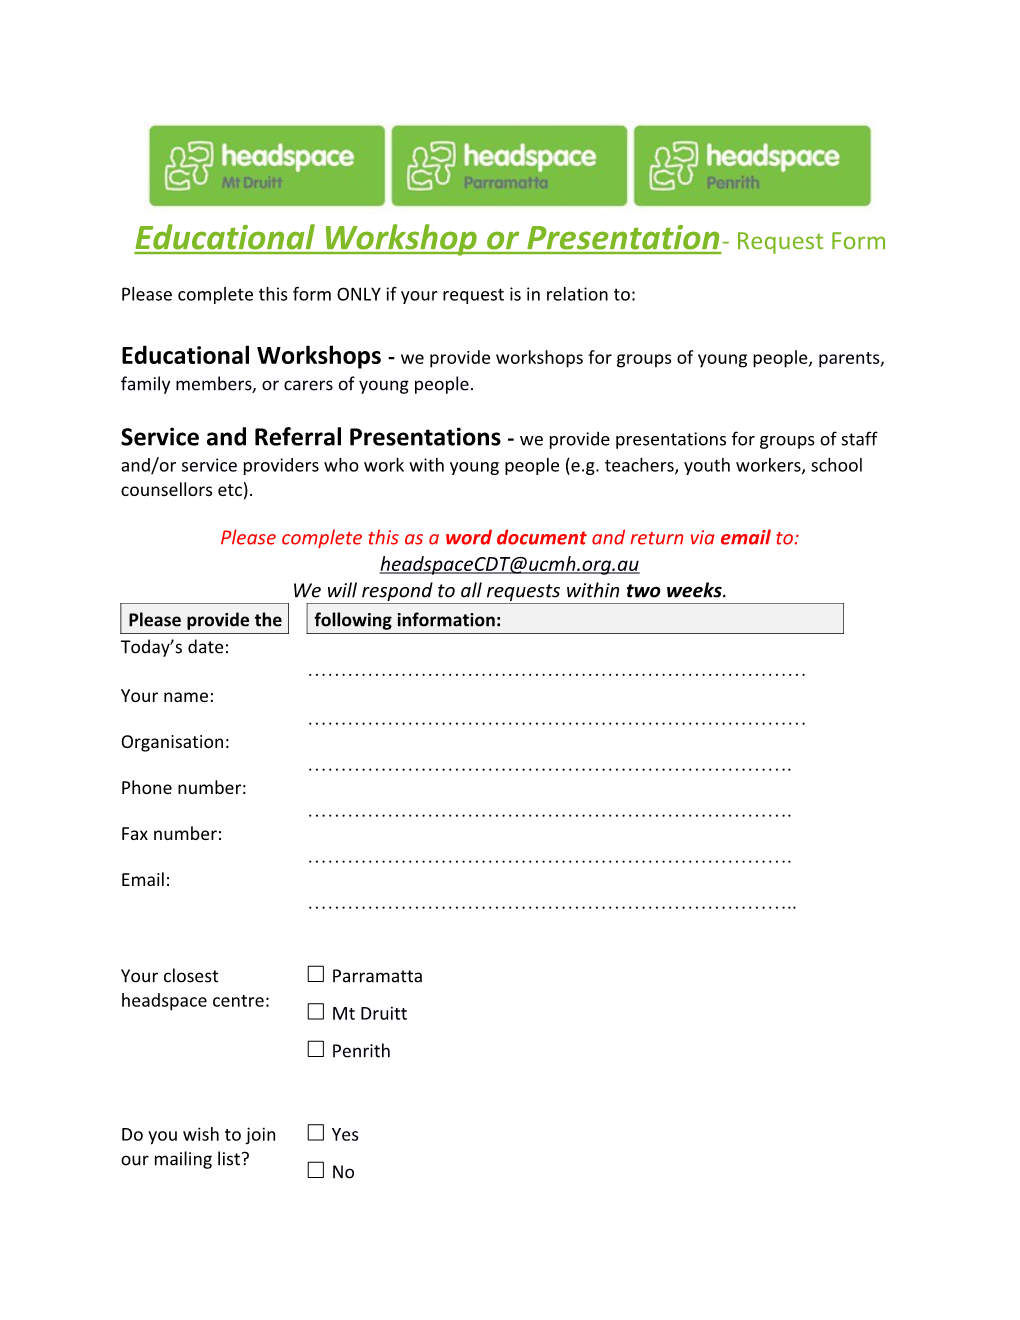 Please Complete This Form ONLY If Your Request Is in Relation To